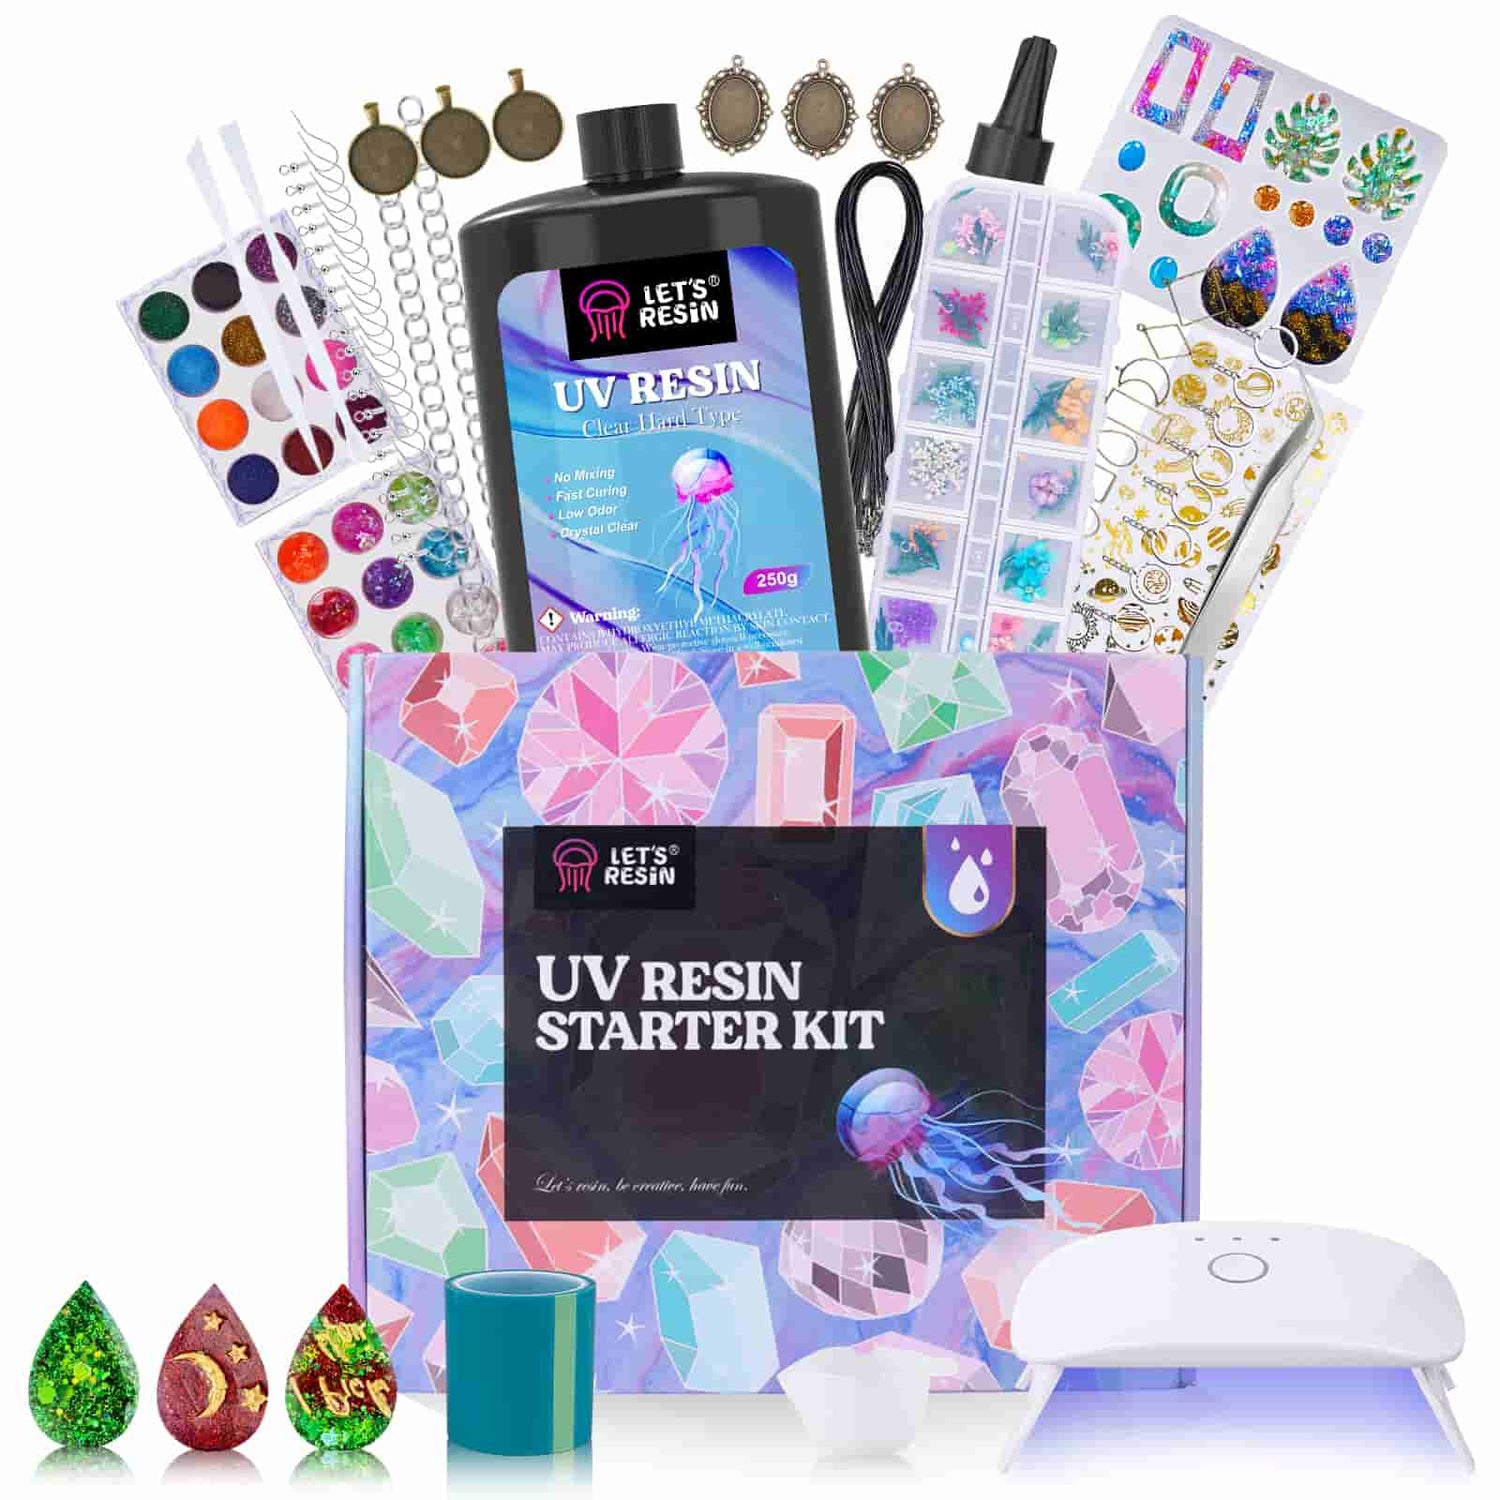 Let's Resin Uv Resin Kit With Light,153pcs Resin Jewelry Making Kit With  Highly Clear Uv Resin, Uv Lamp, Resin Accessories 